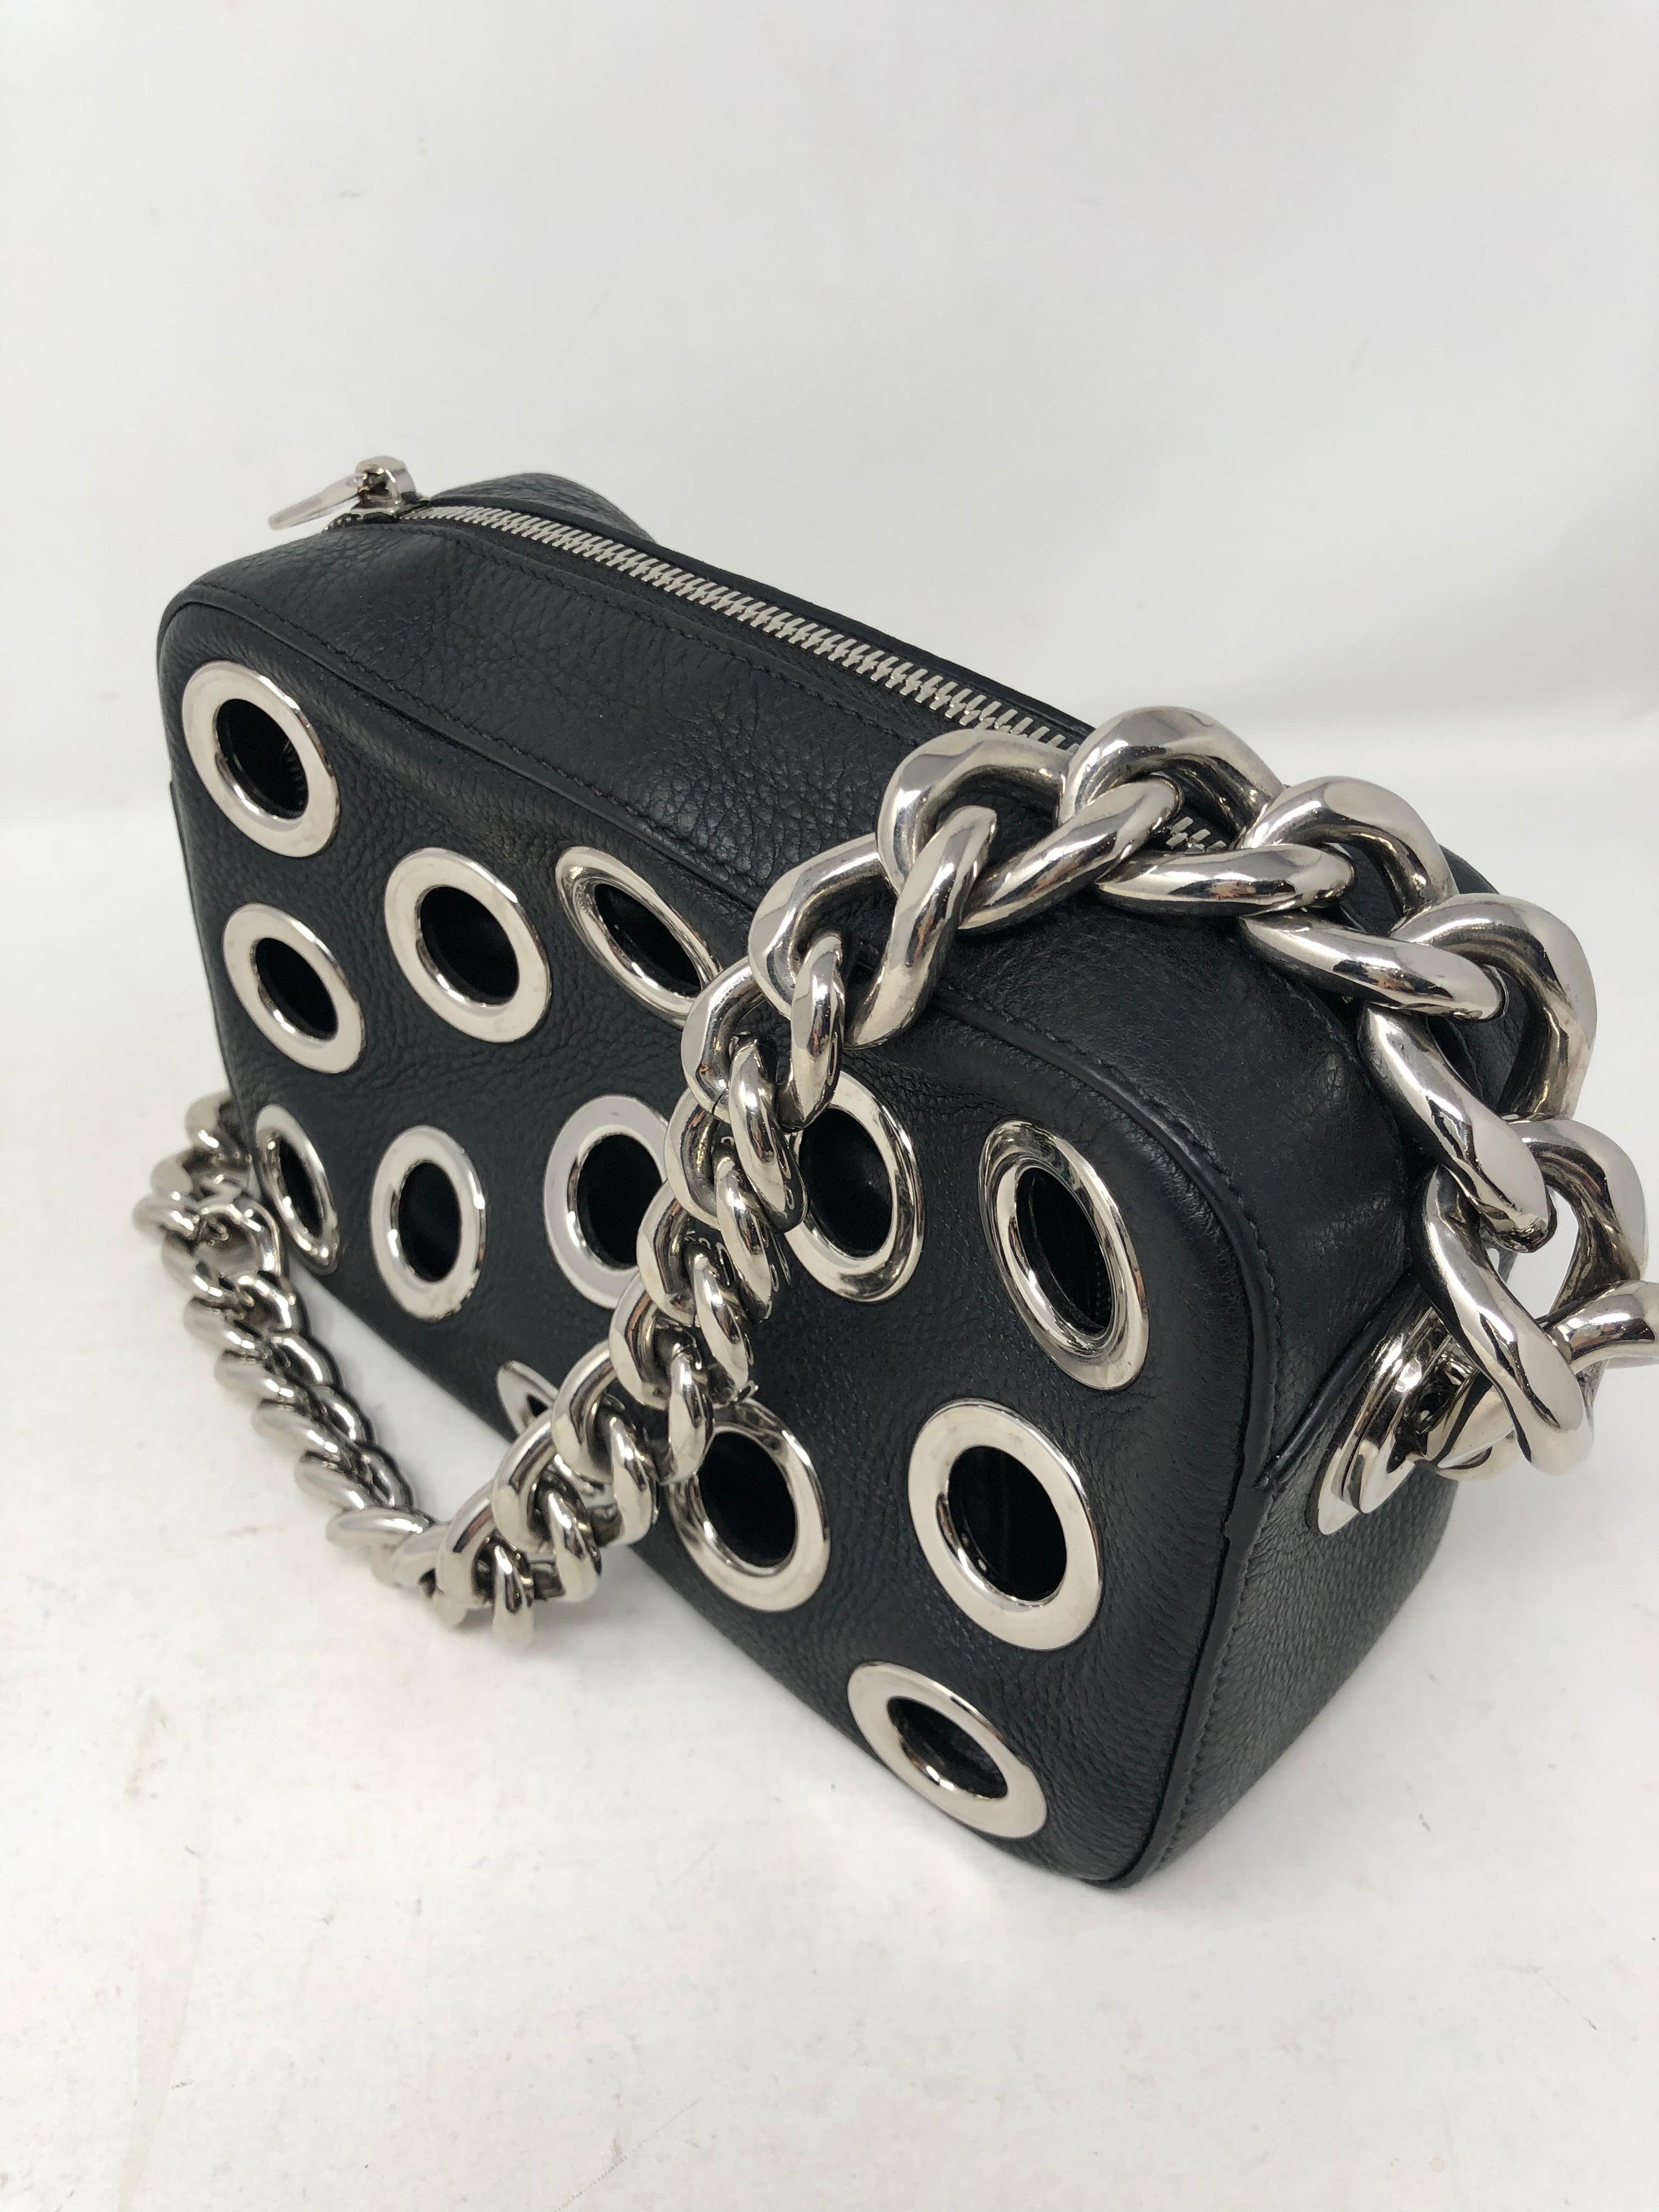 Prada Black Art Bag with Silver metal holes. Silver hardware. Unique style and wearable art. Leather interior with extra leather pouch included. Mint condition. Guaranteed authentic. 